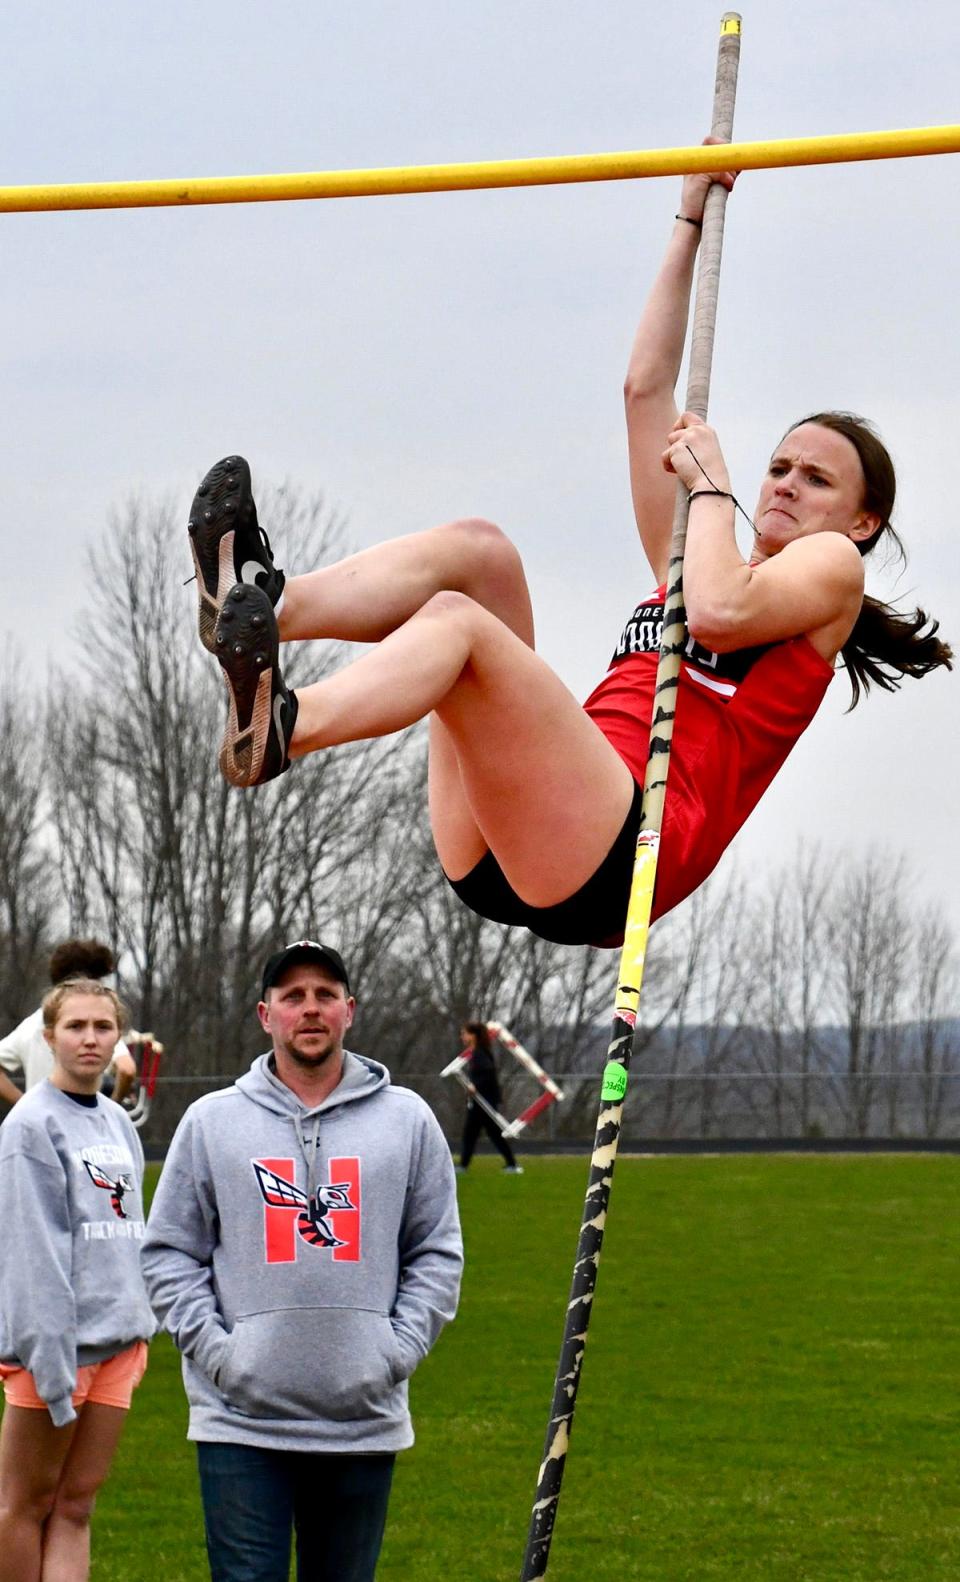 Roz Mikulak is the new Honesdale girls record holder in the pole vault after clearing the bar at a height on 9 feet 1 inch.